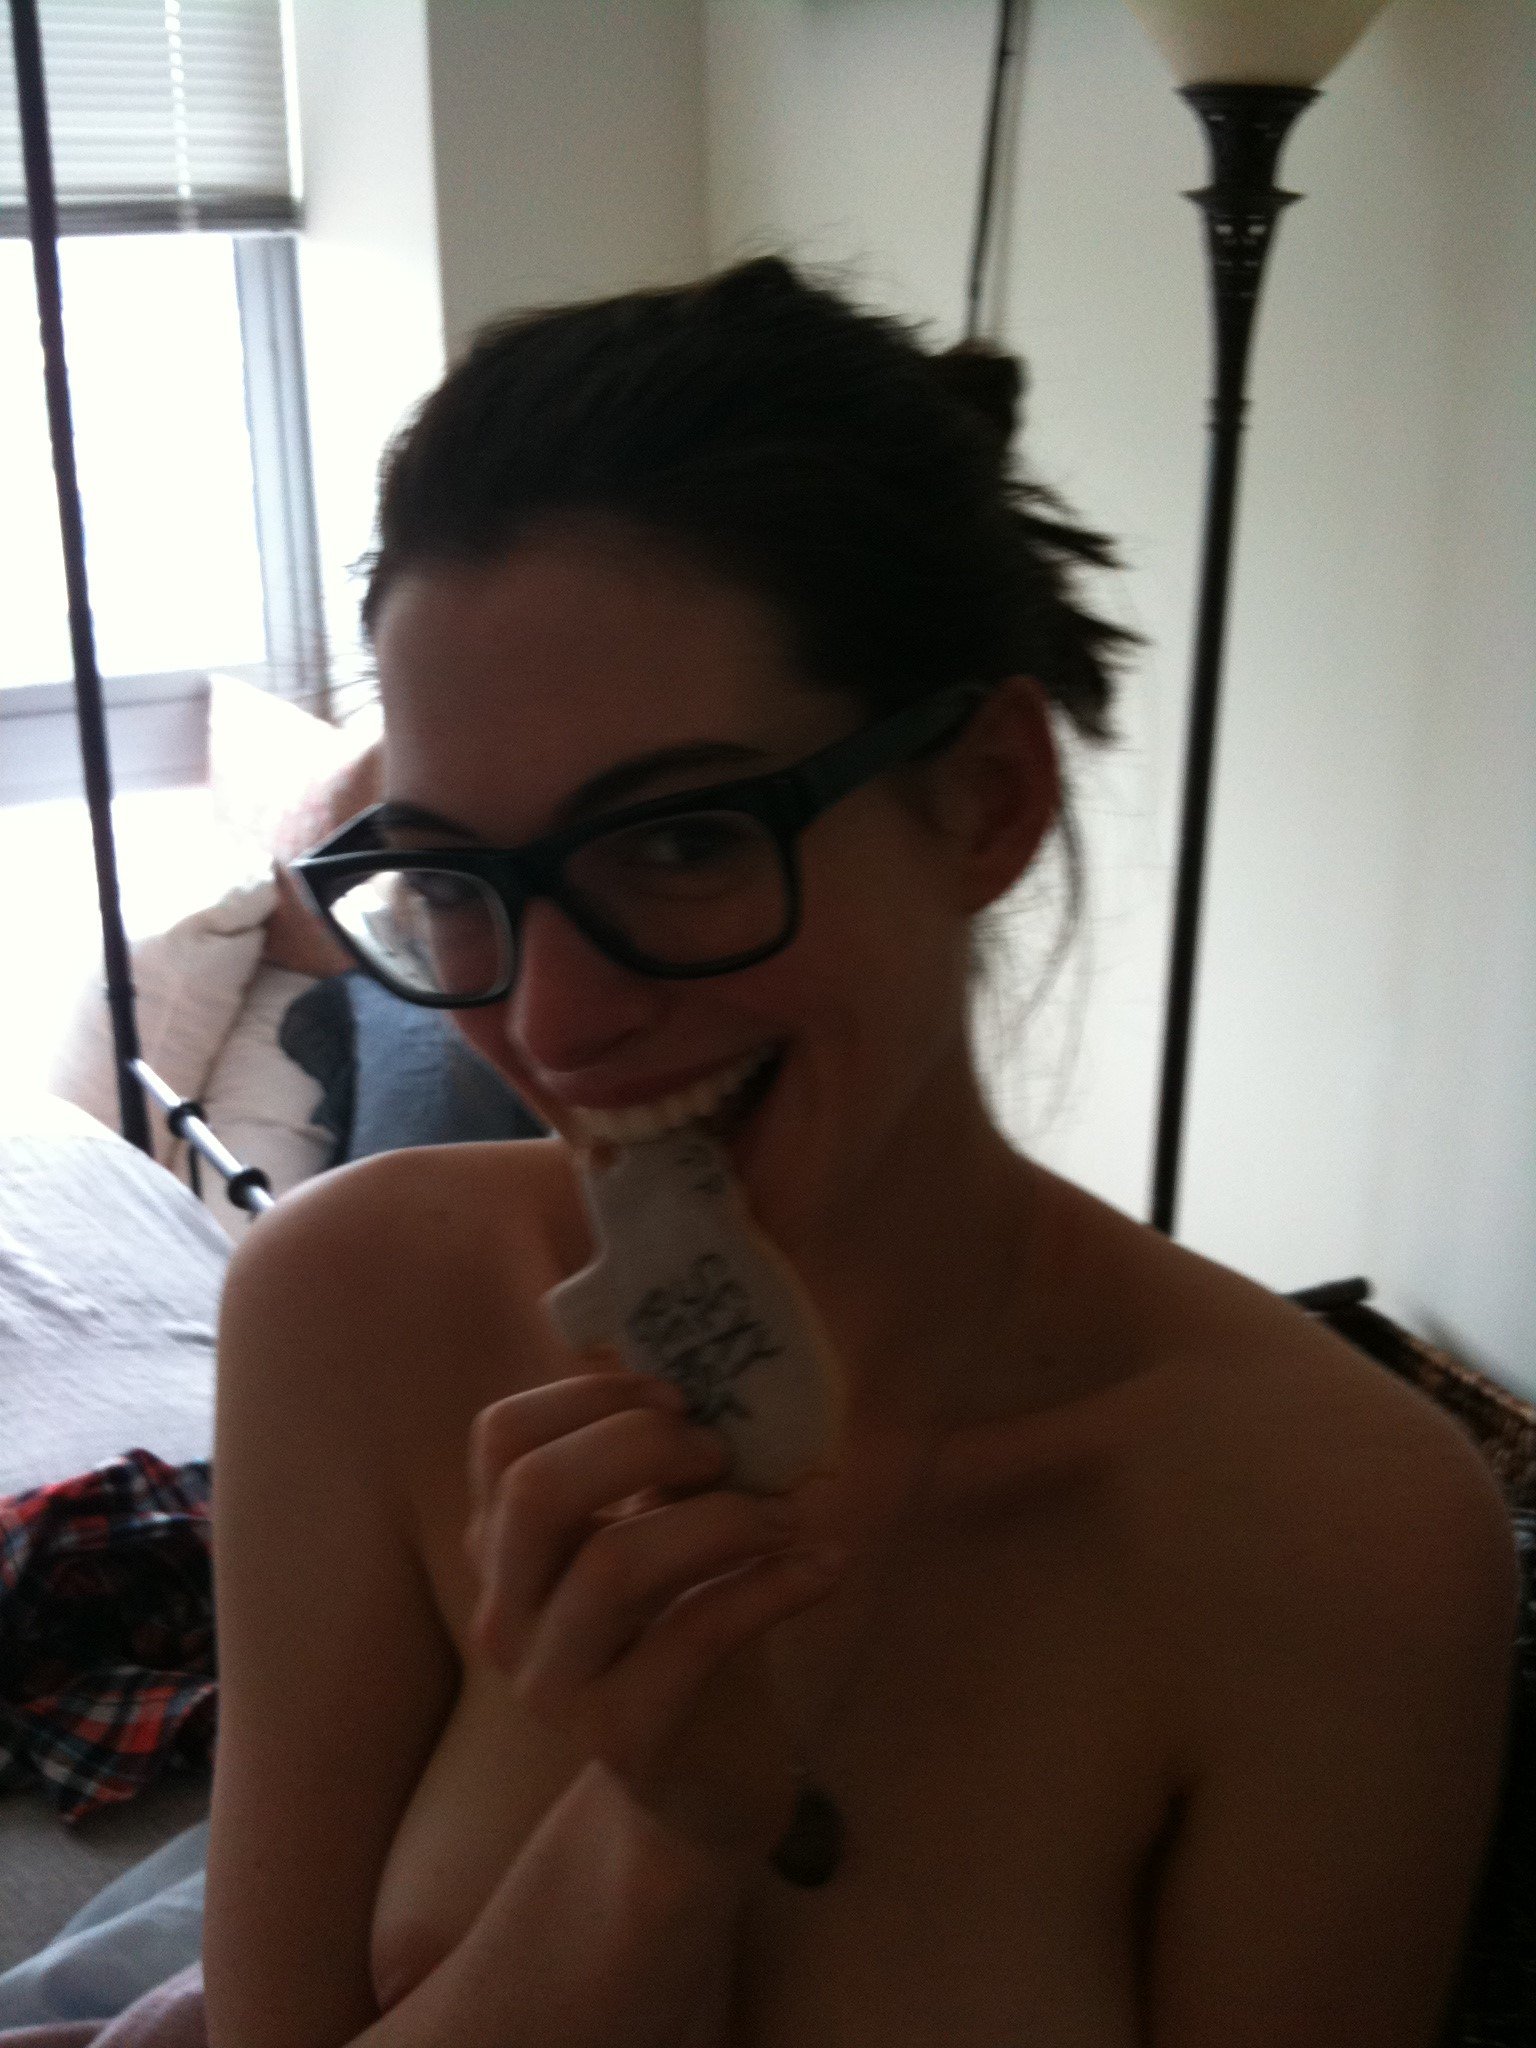 Anne Hathaway selfie pic from thefappening